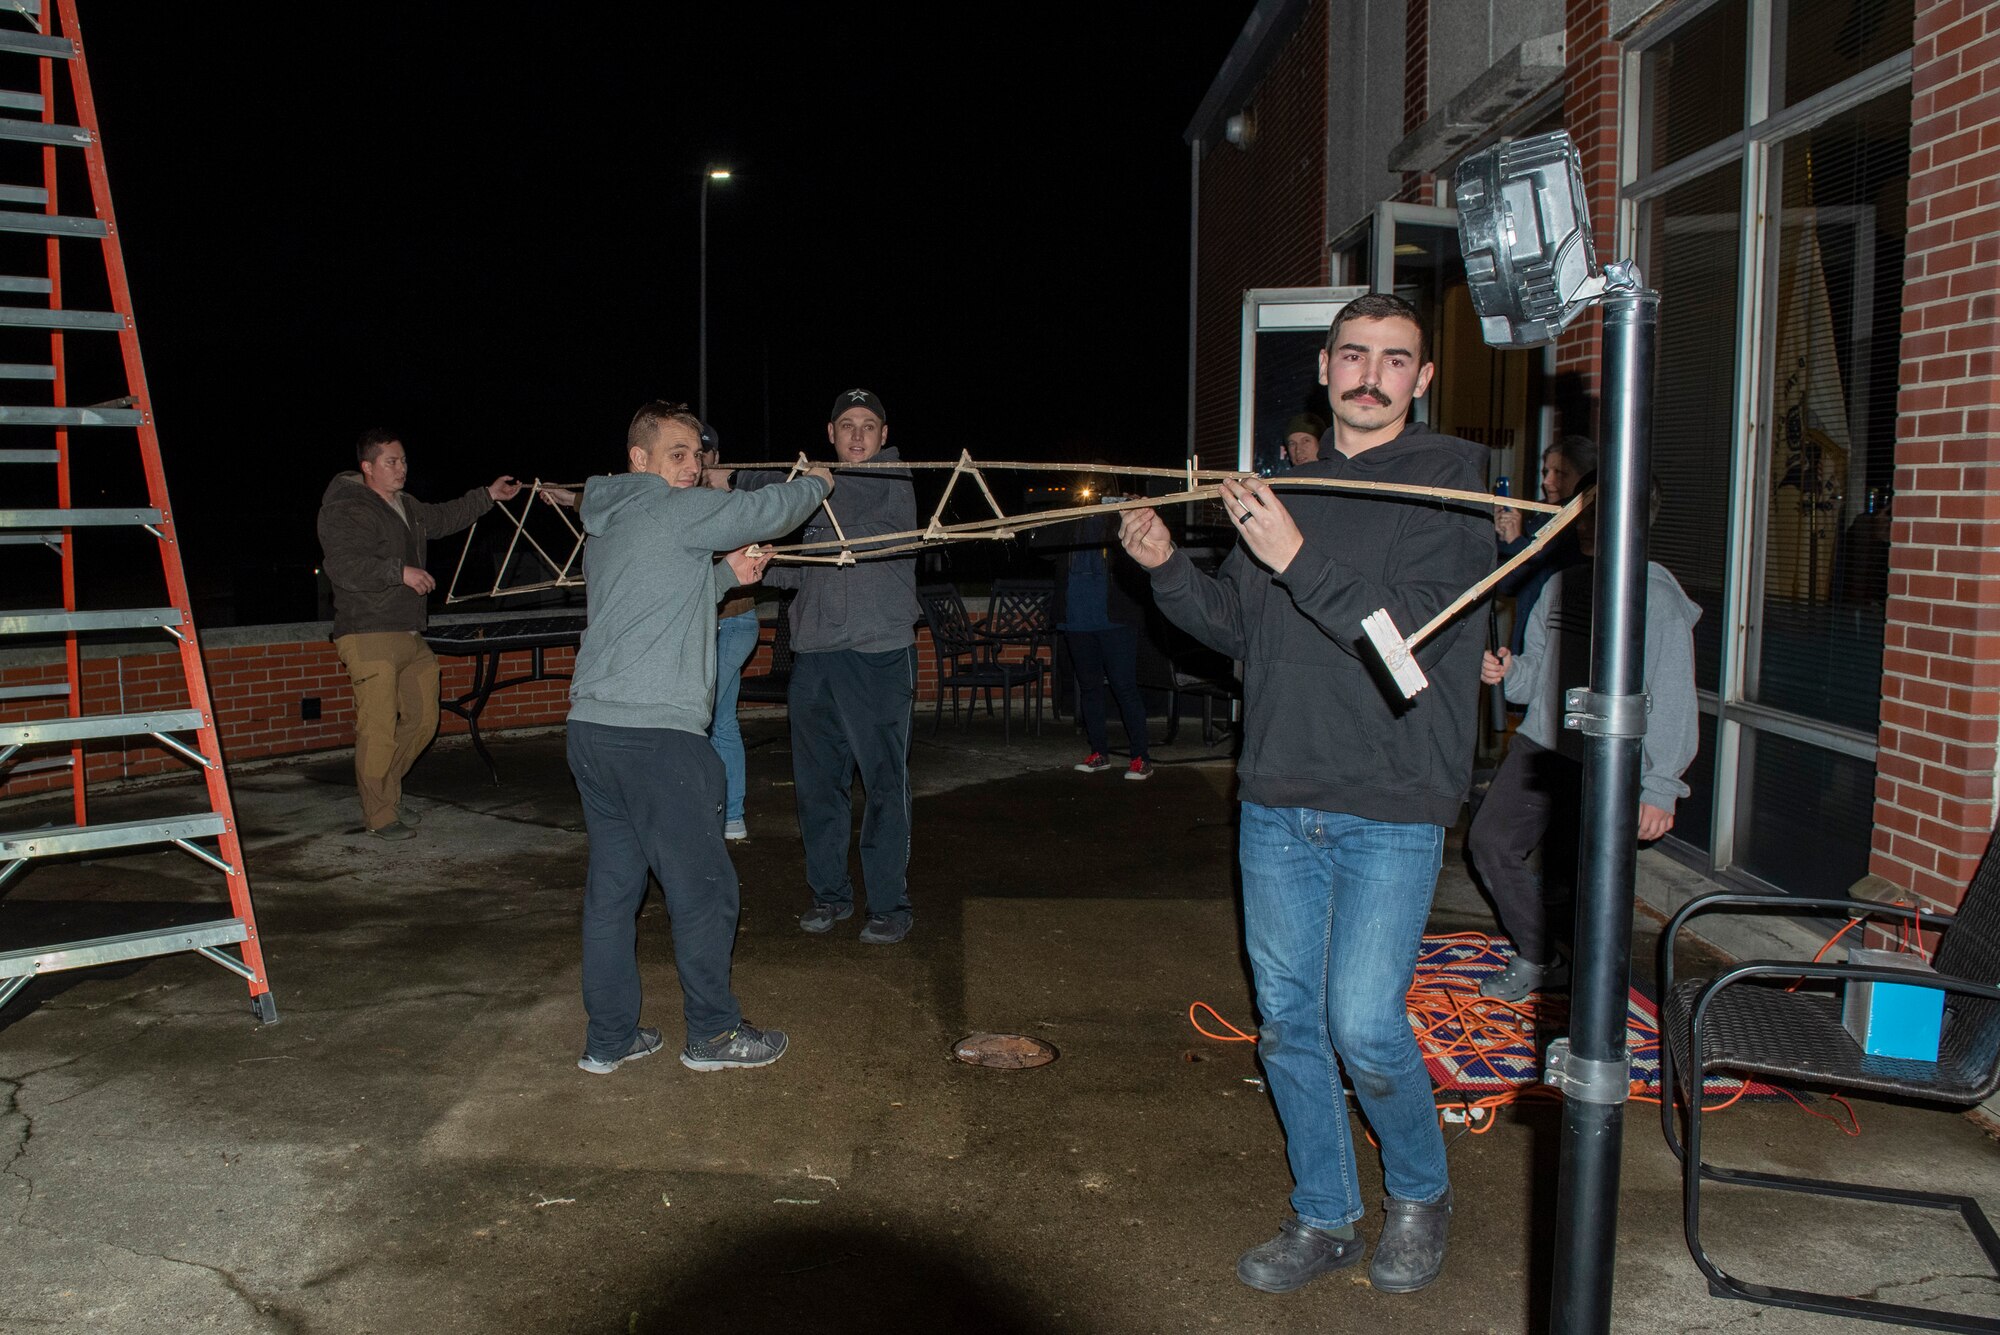 Volunteers carry the completed spire of a popsicle-stick structure.